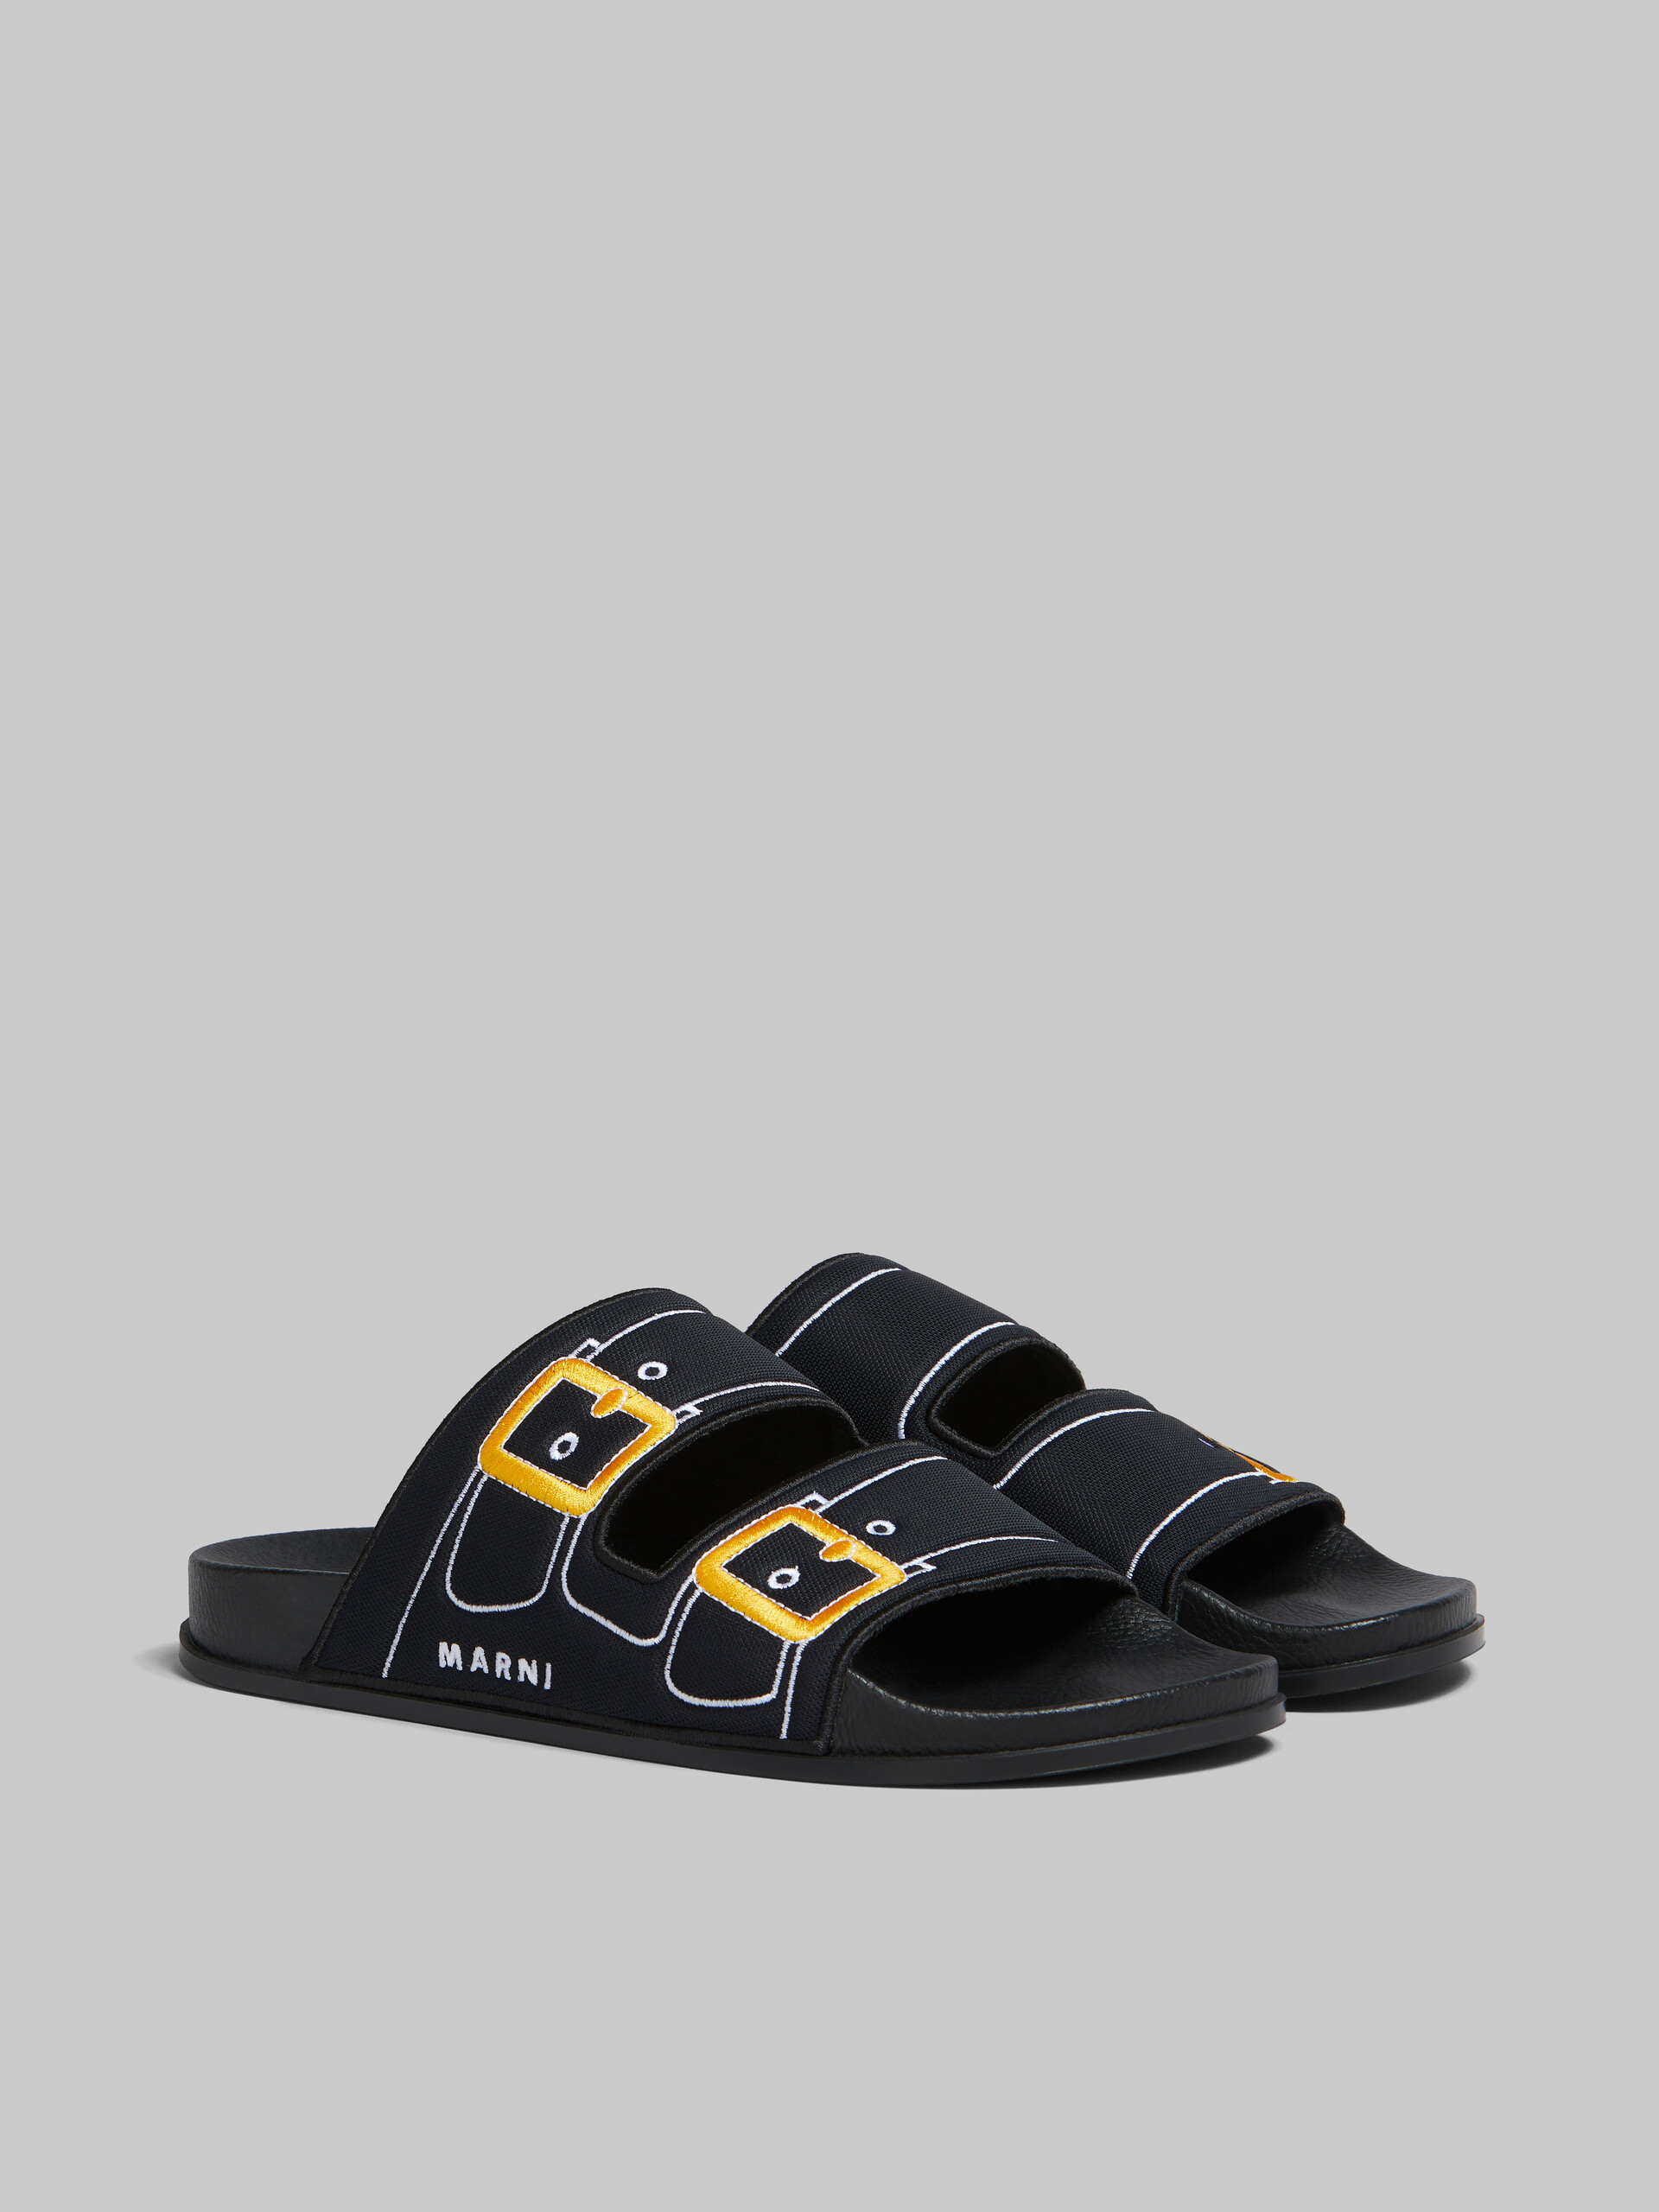 Blue trompe l'oeil slider with embroidered buckles - Sandals - Image 2